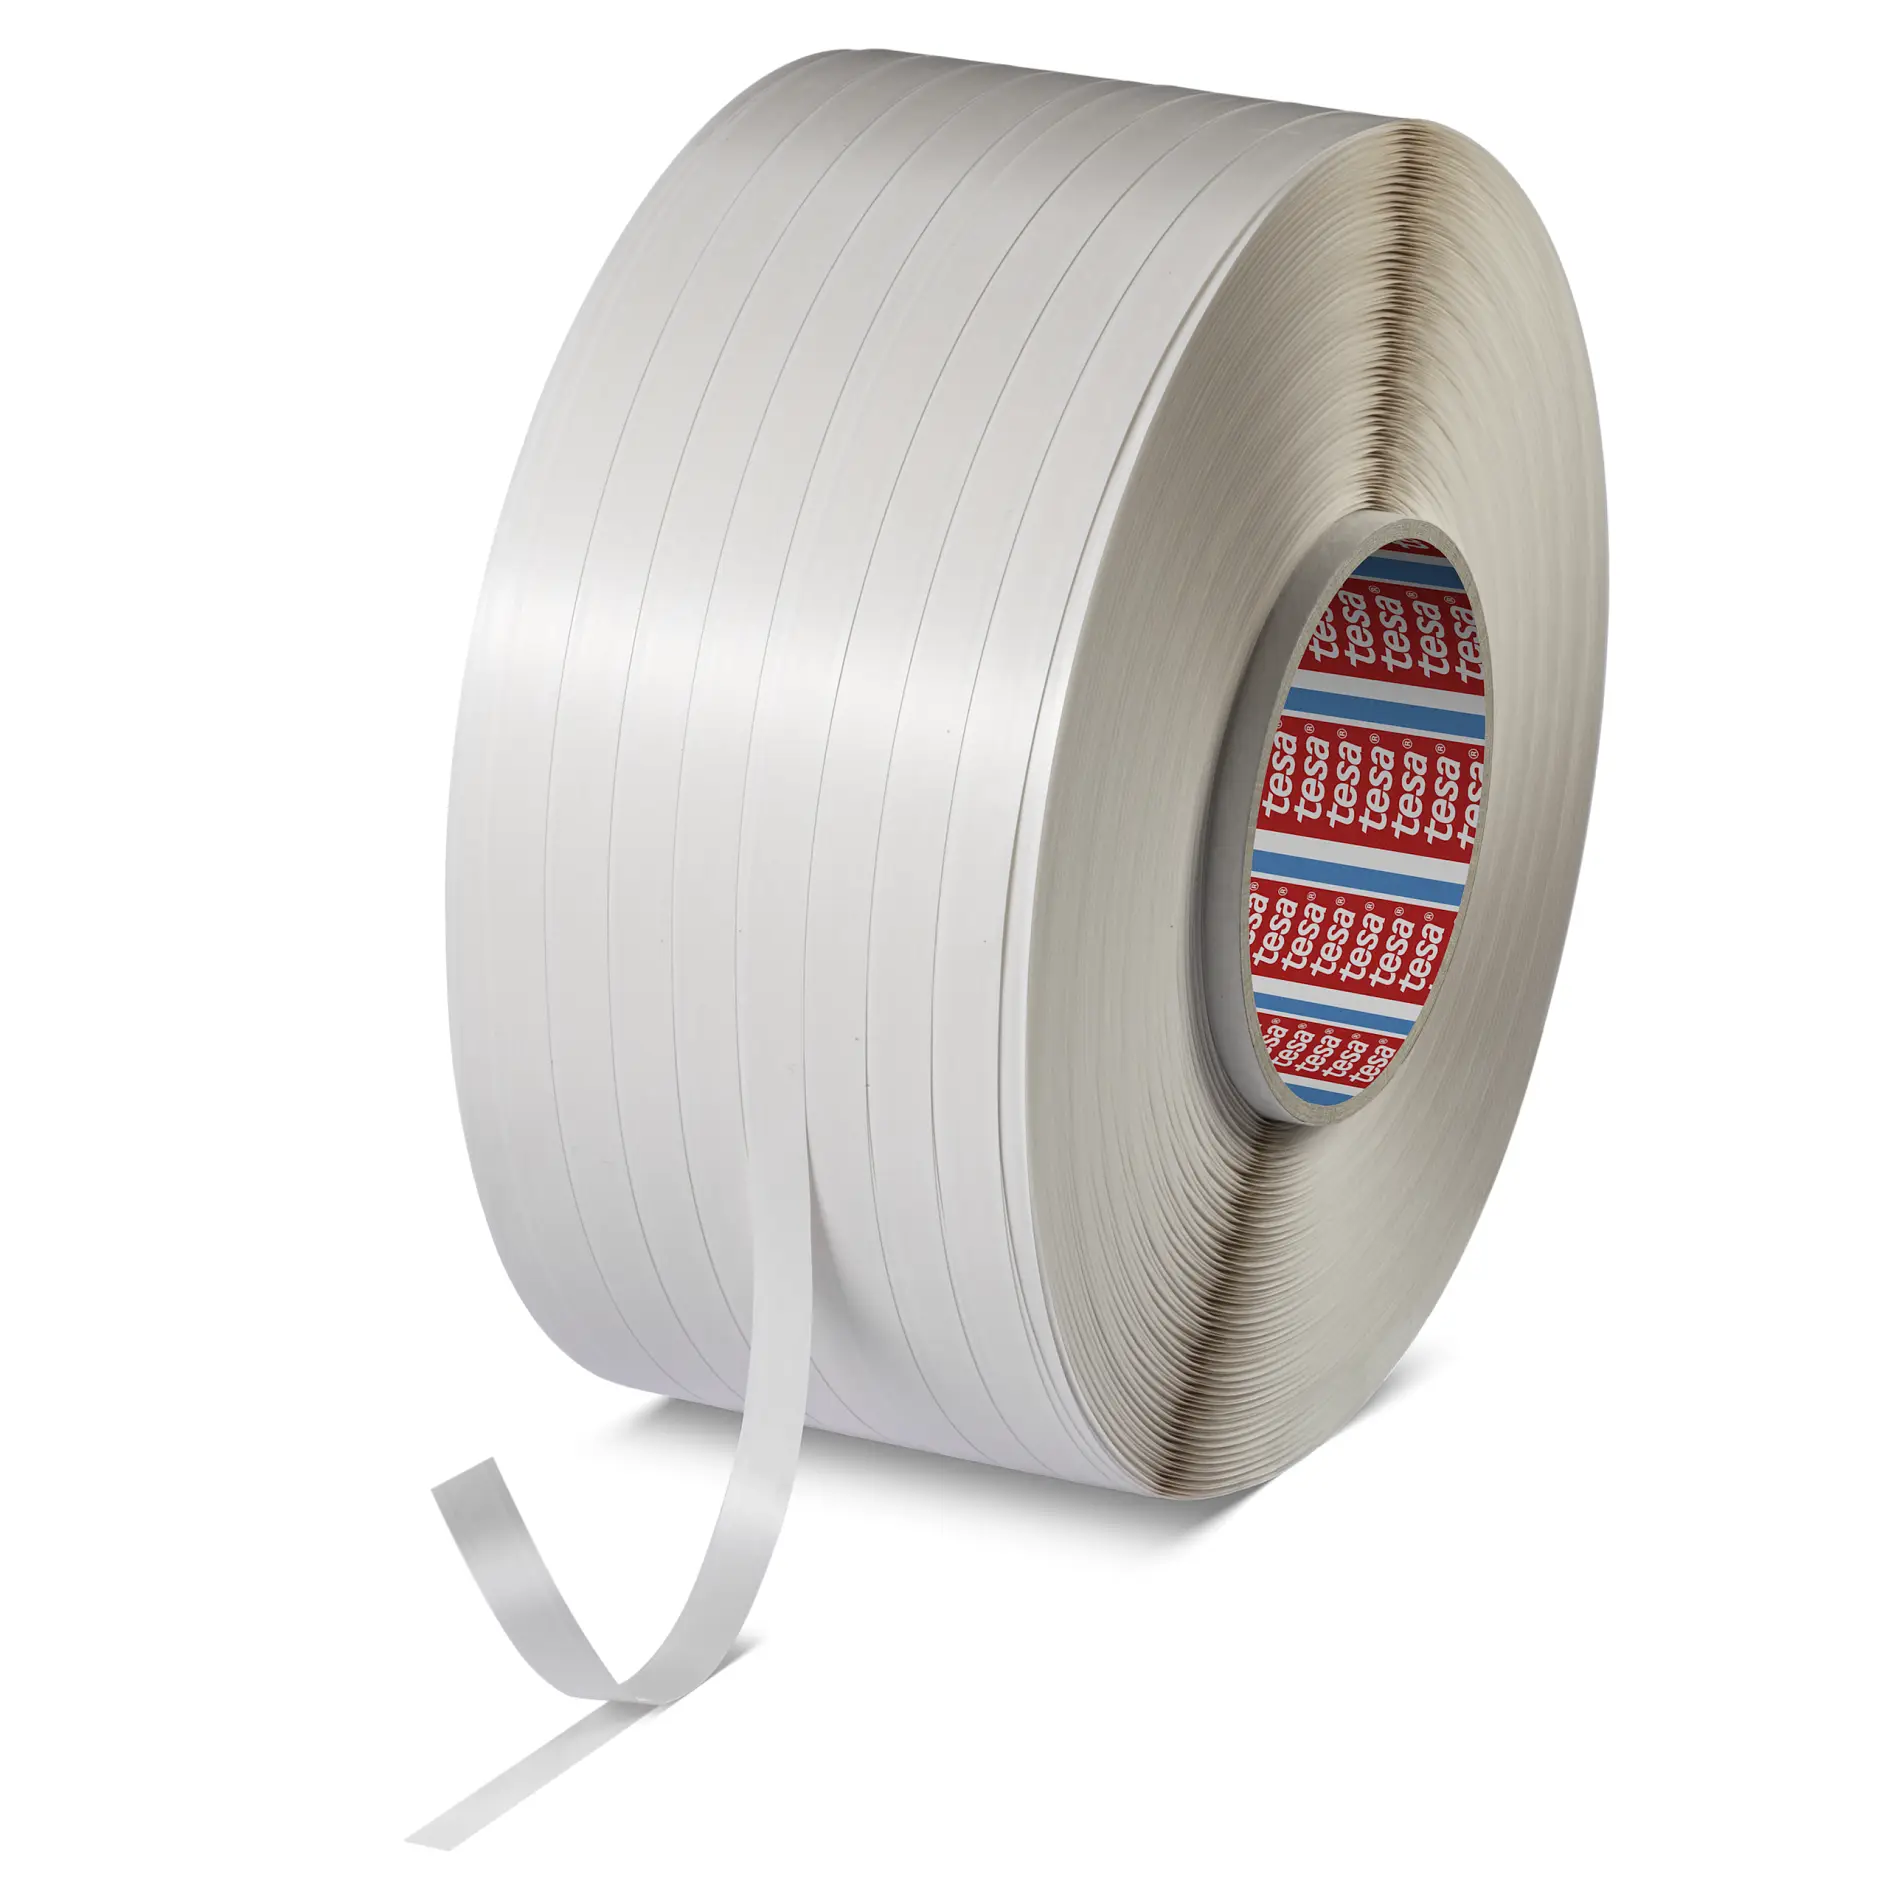 tesa-ID-61346-double-sided-paper-based-closing-tape-spule-white-61346-00000-01